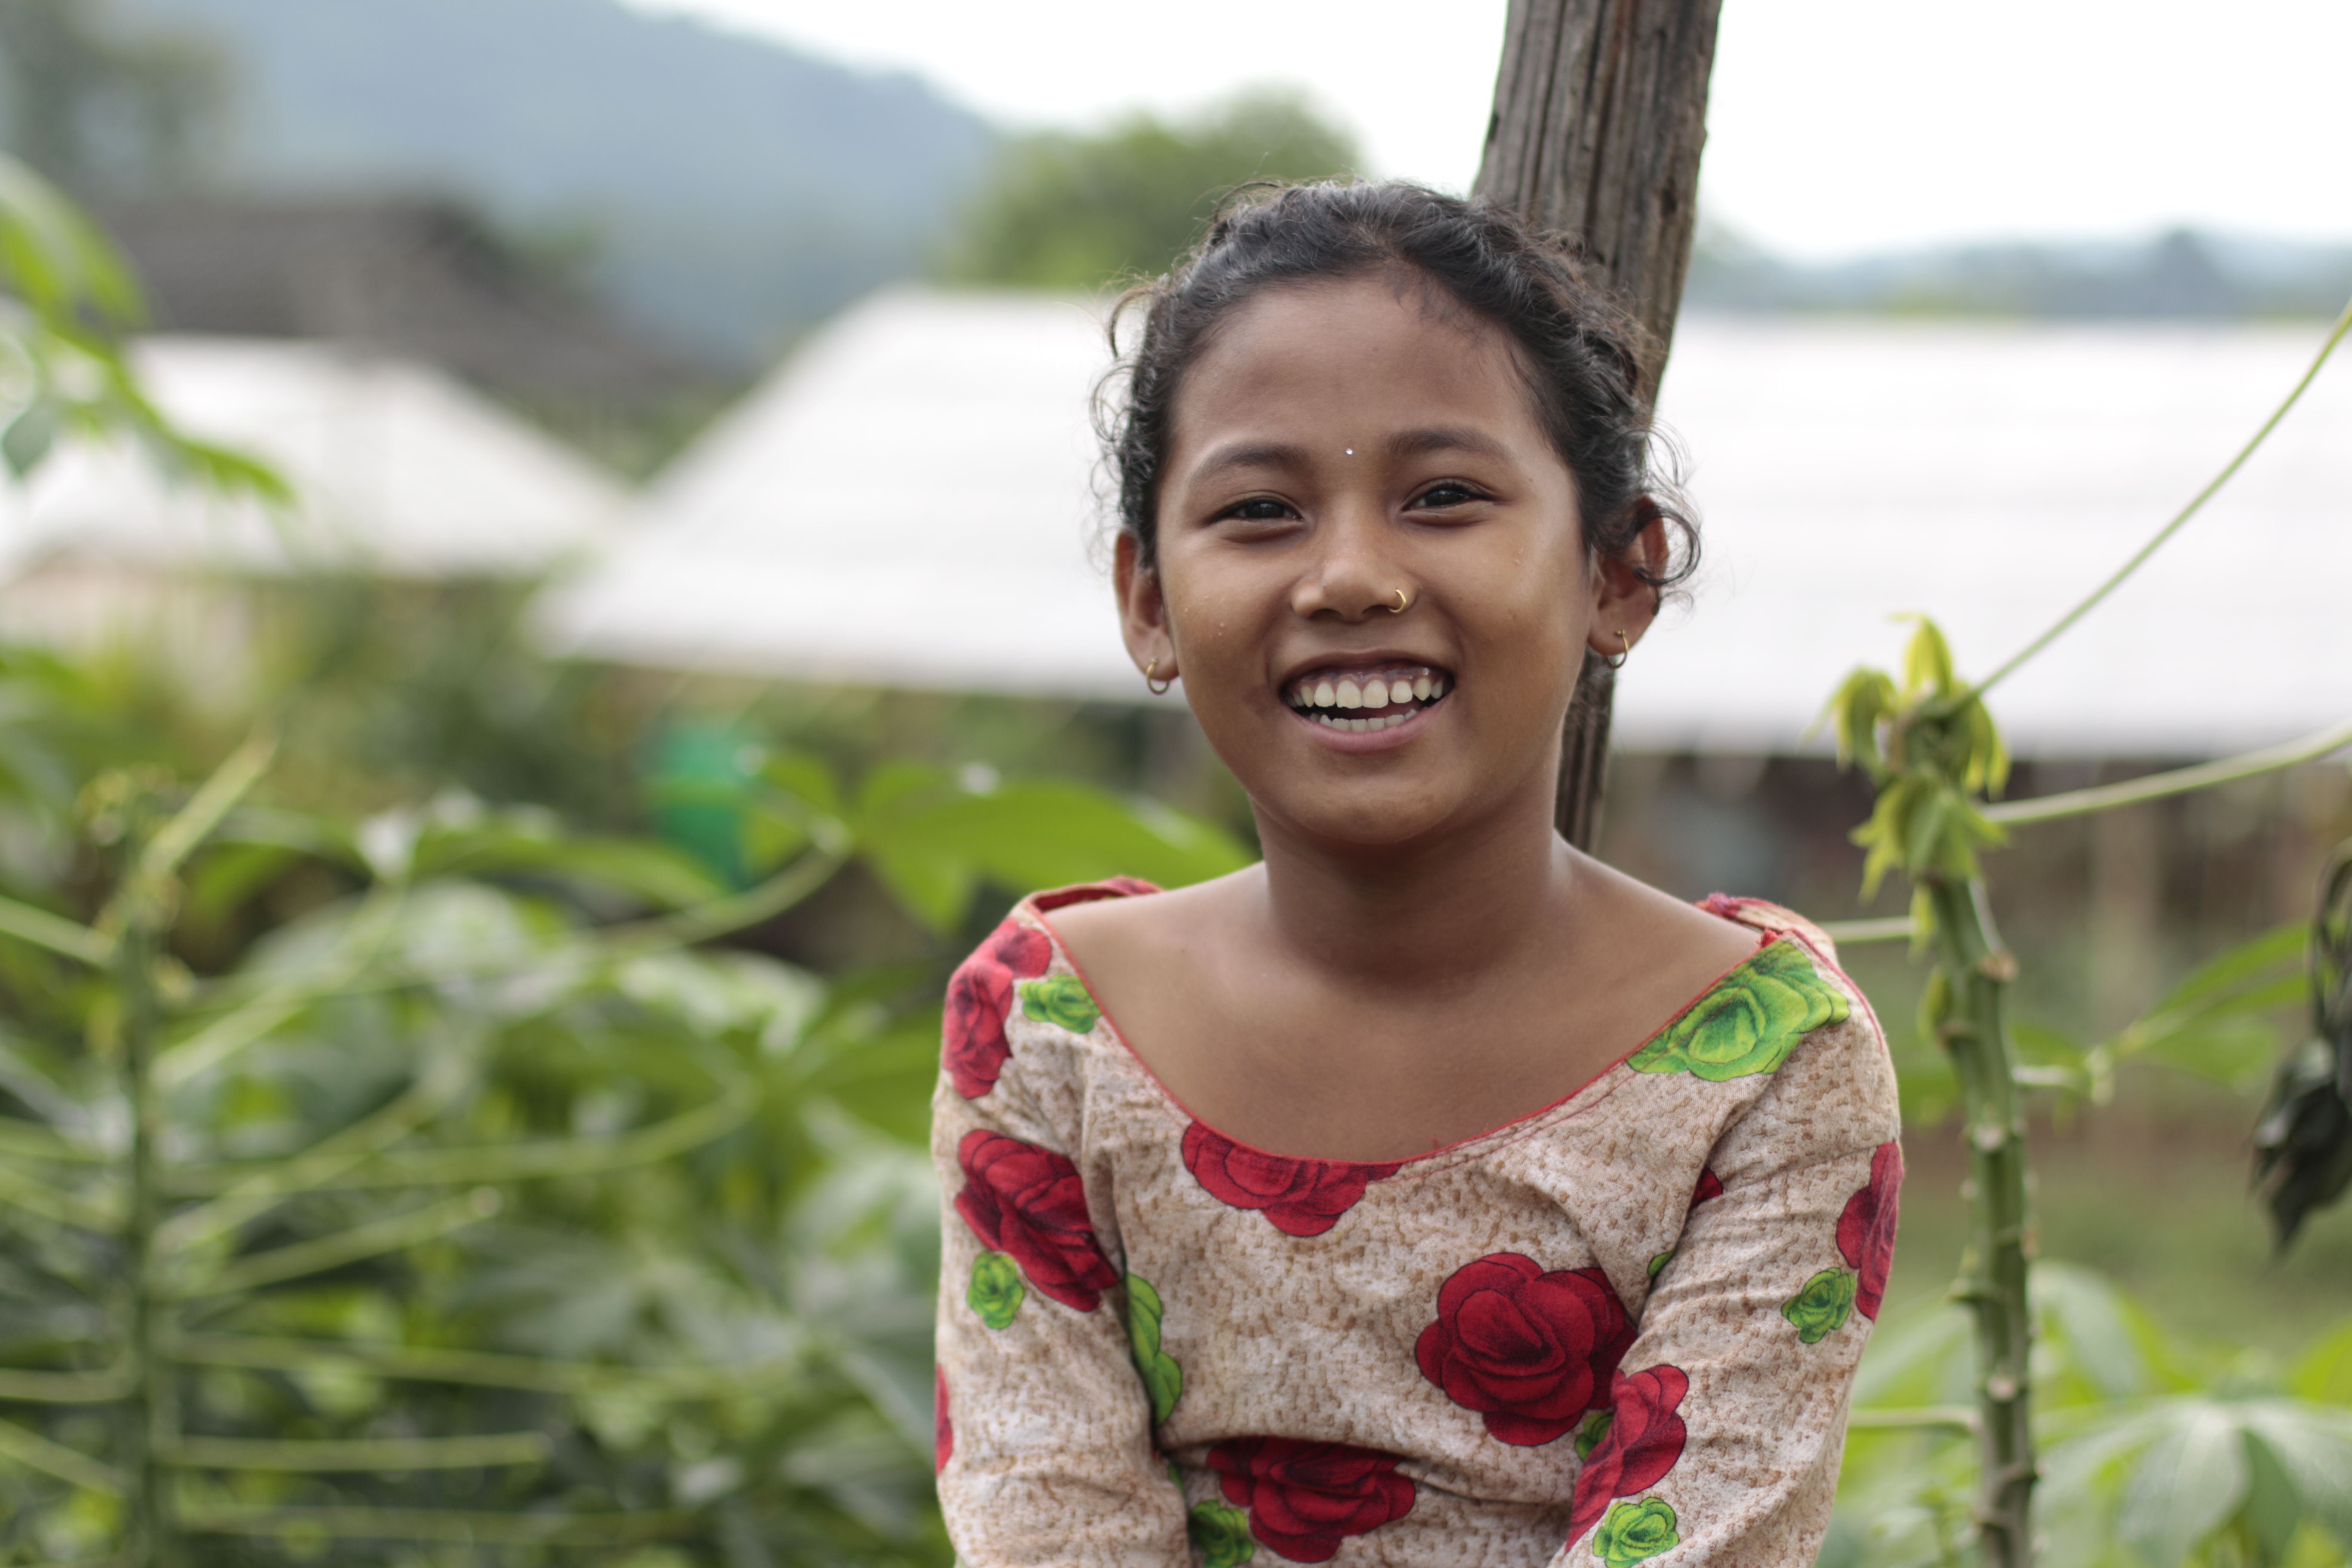 Sponsored child from Nepal smiles, sitting outside in front of foliage